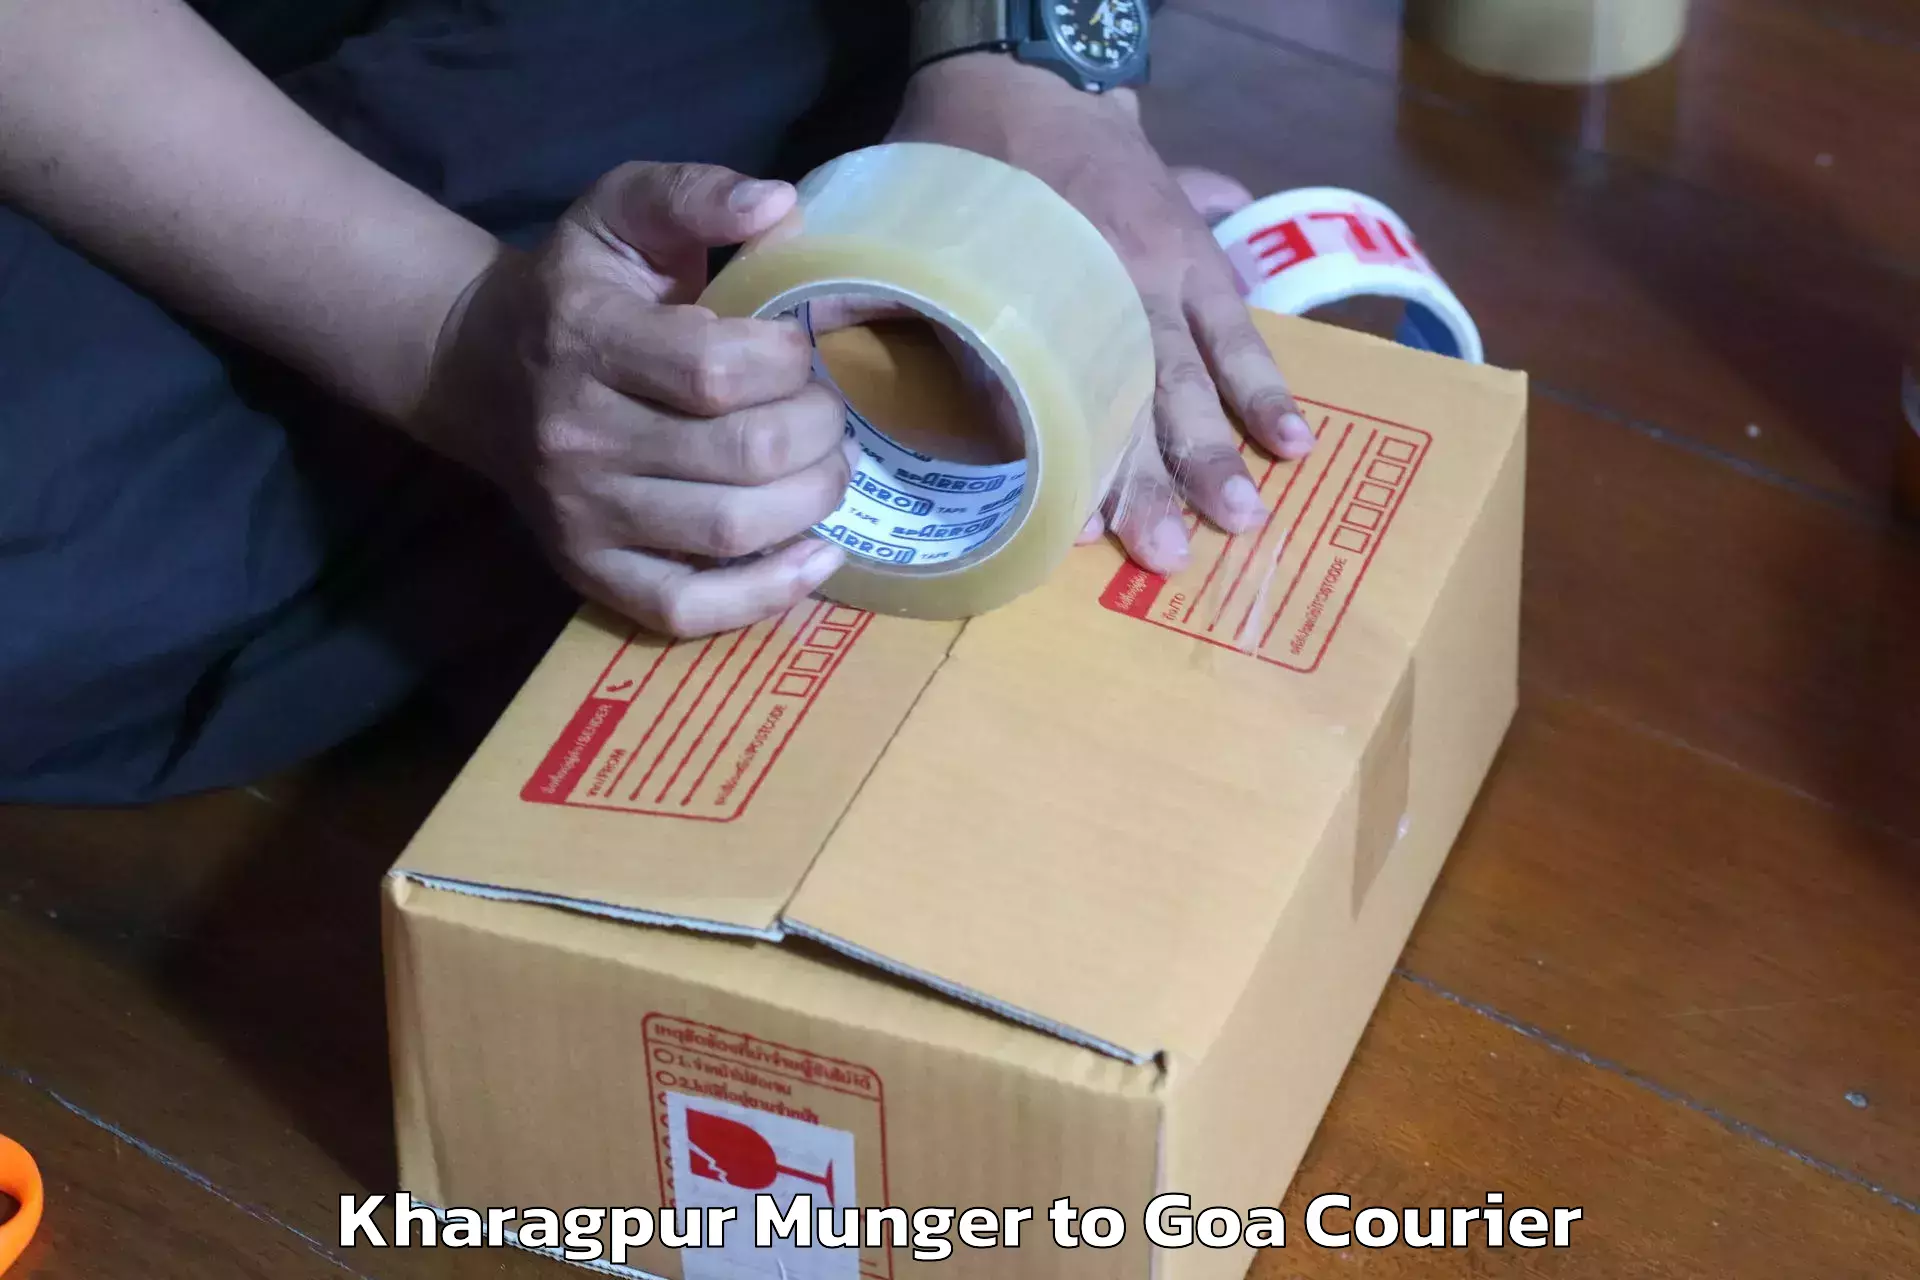 Furniture delivery service Kharagpur Munger to Goa